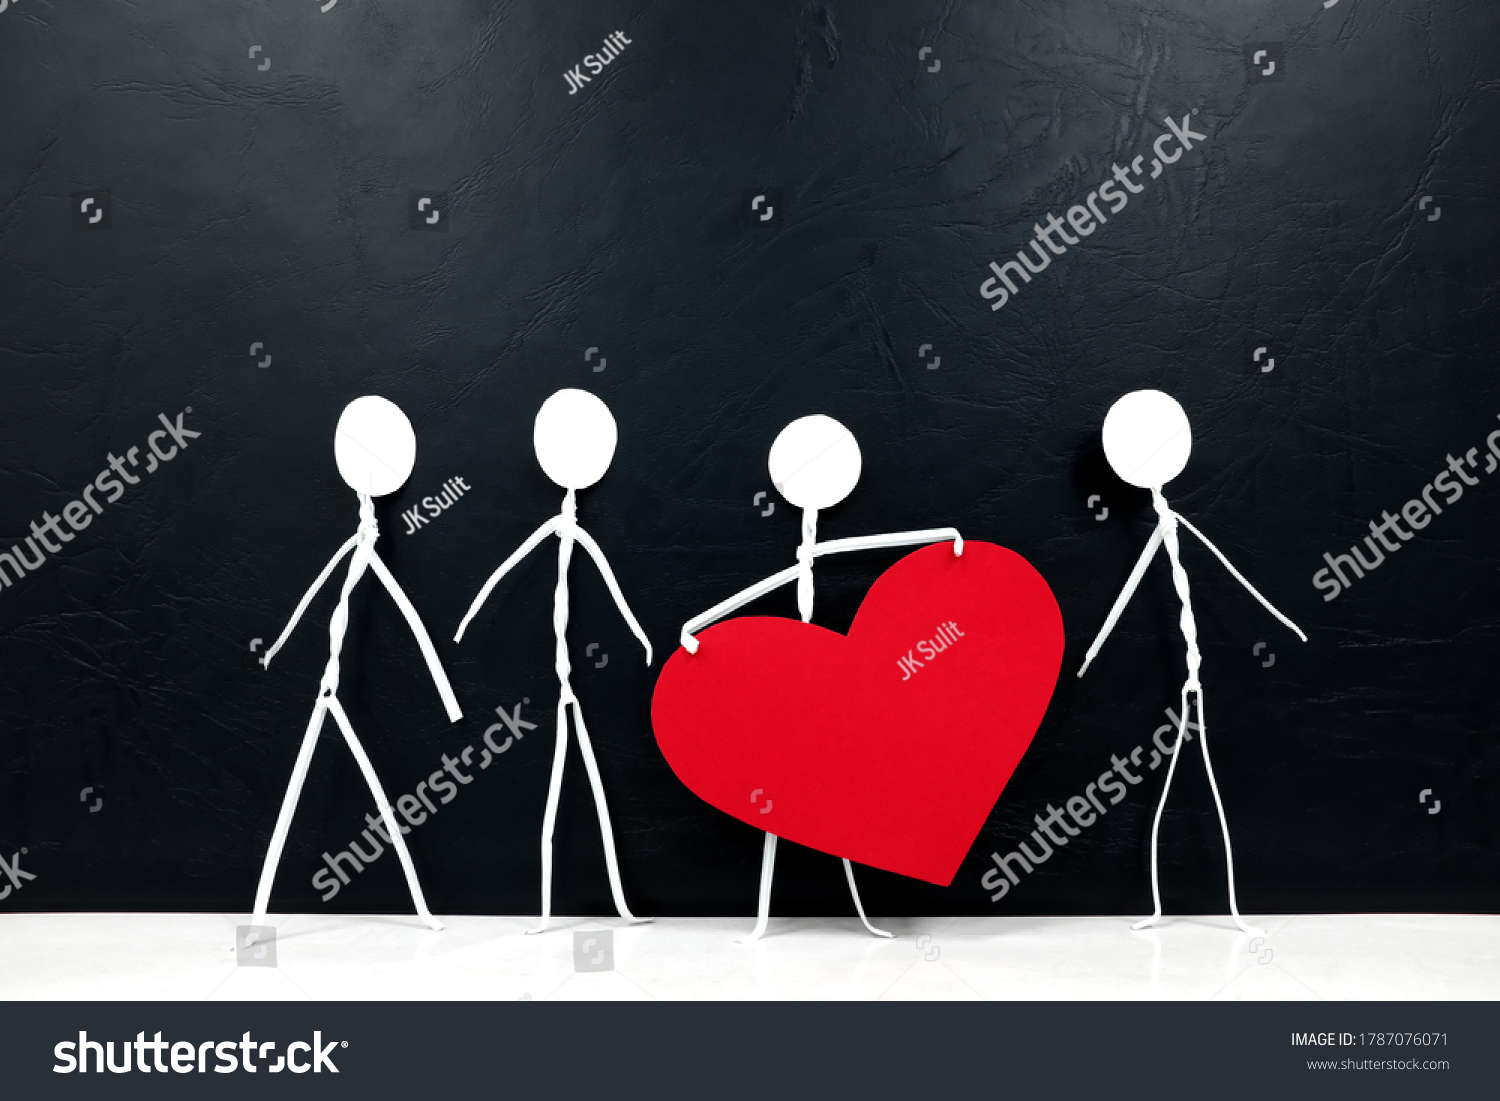 Stick man holding big red heart shape while sharing to other people. Share love and kindness concept. #1787076071